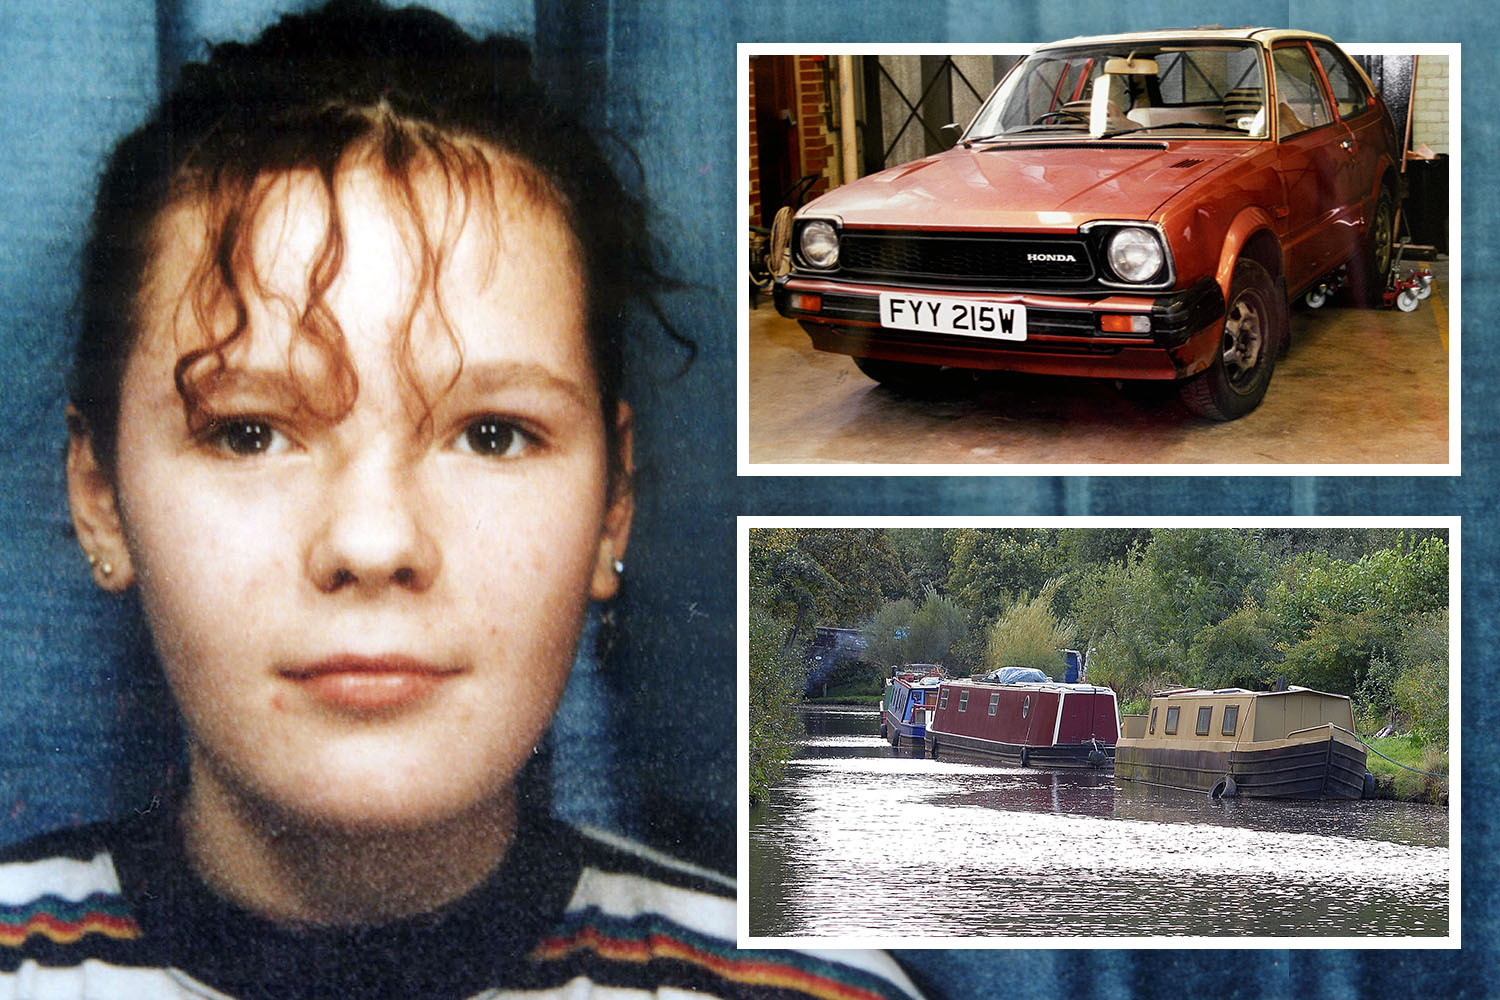 Red Honda could be secret of girl, 13, found dead under 20lb rock in canal